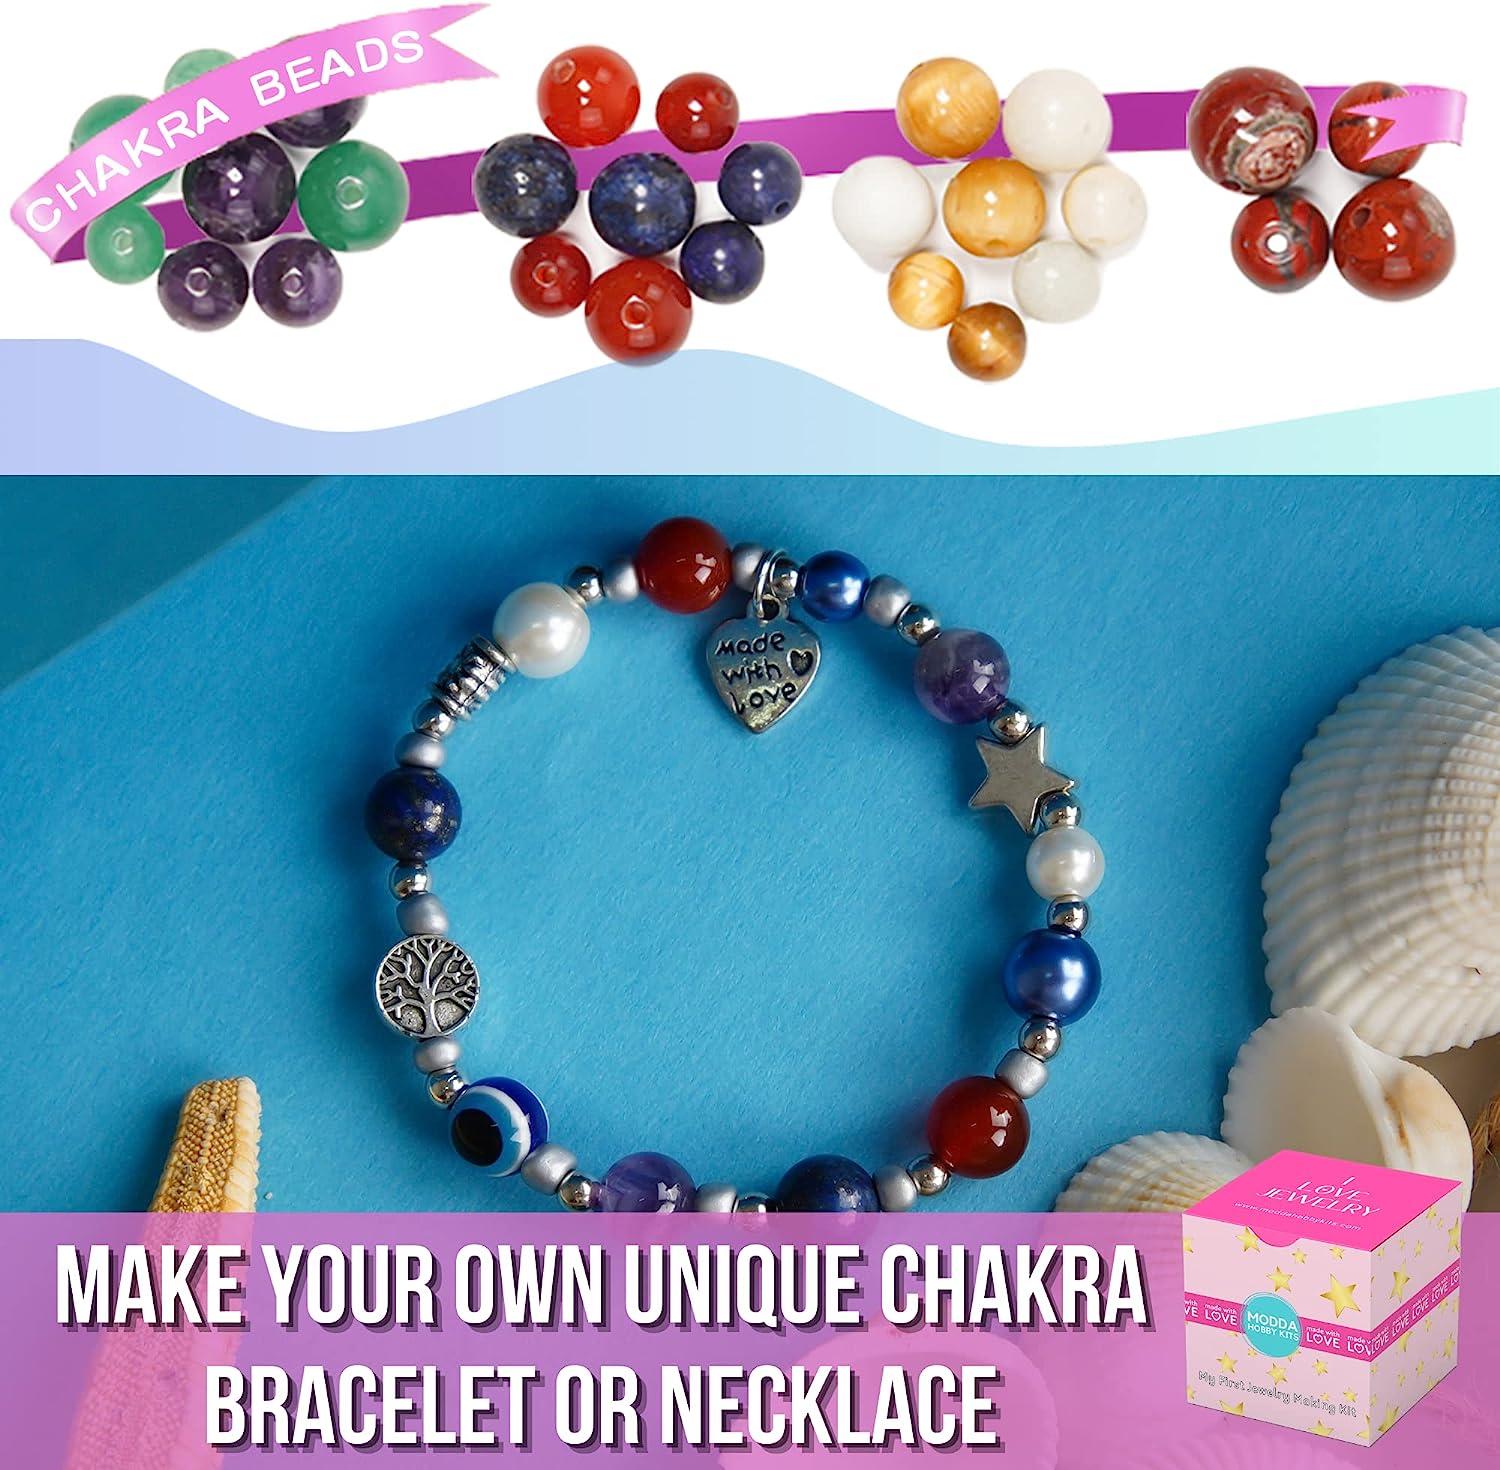 MODDA Natural Stone Jewelry Making Kit with Video Course, Includes